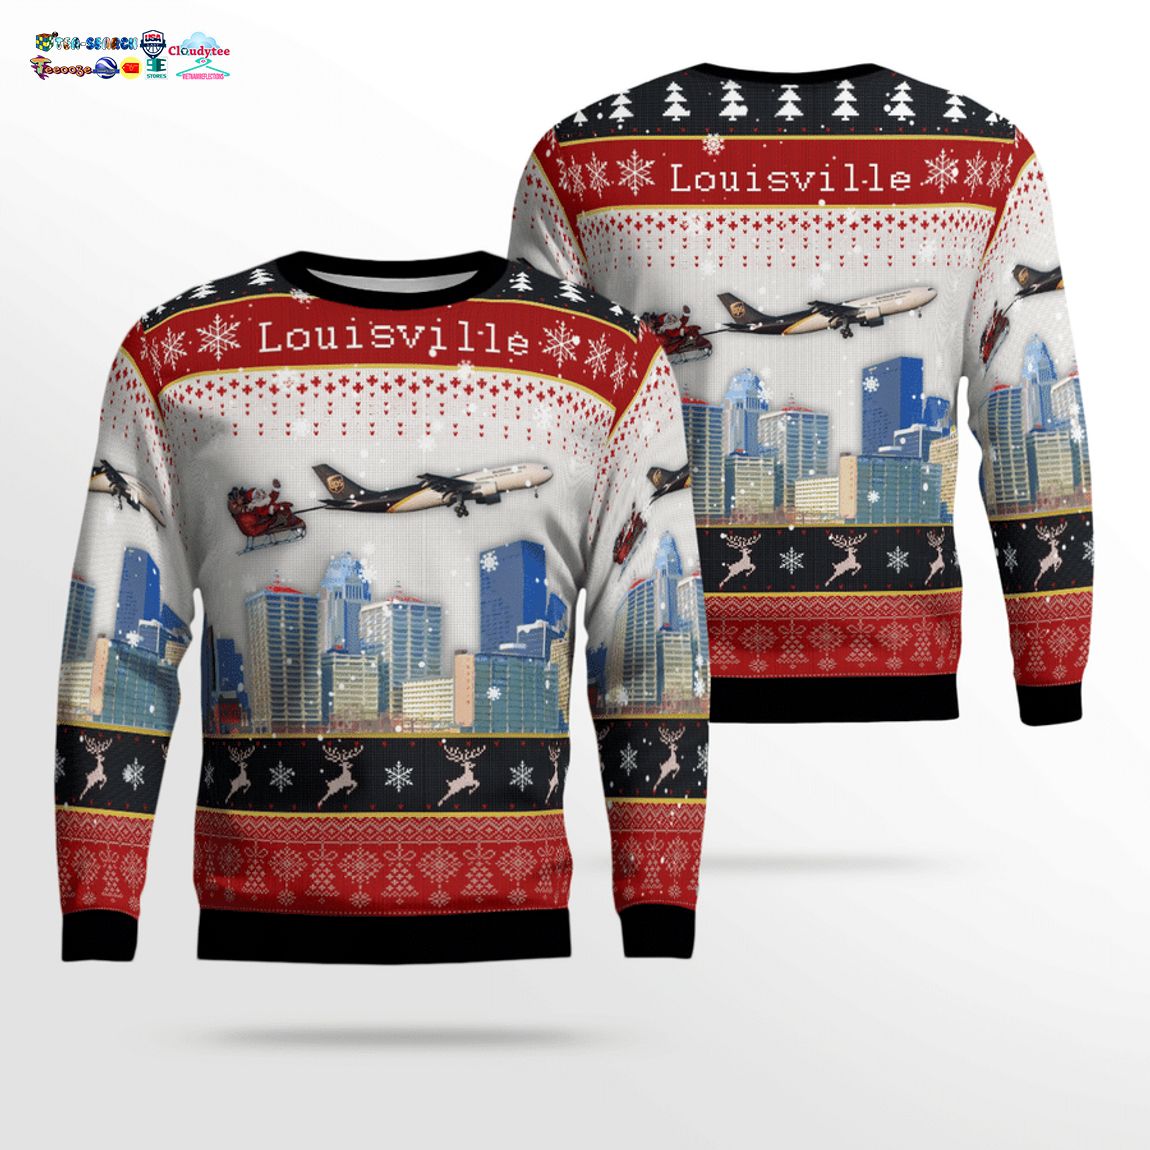 UPS Airlines Airbus A300F4-622R With Santa Over Louisville 3D Christmas Sweater